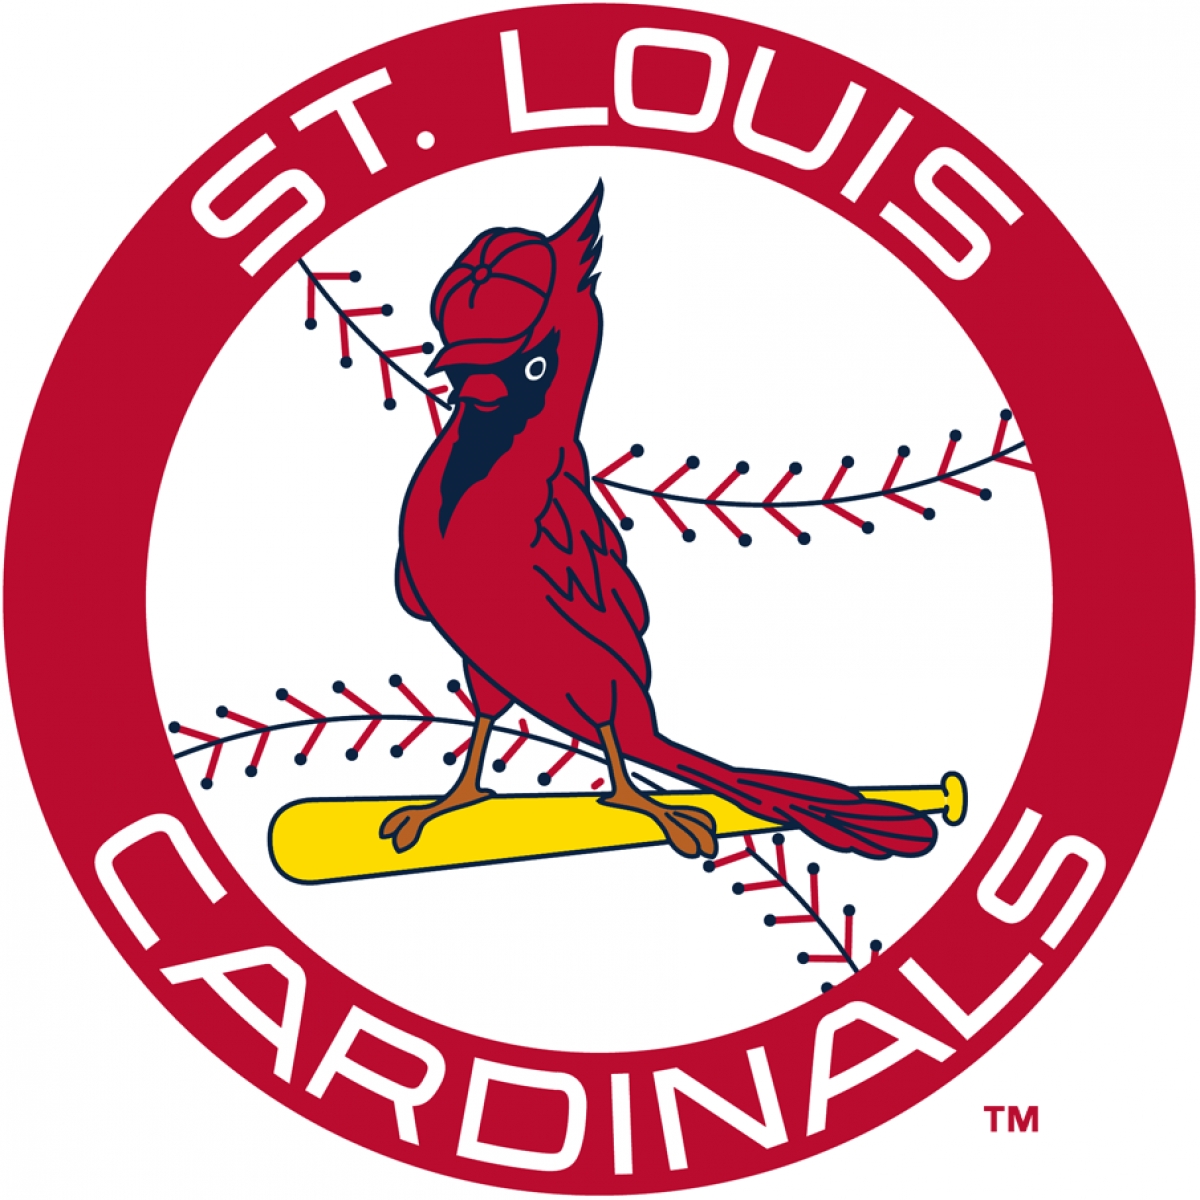 Not in Hall of Fame - The St. Louis Cardinals announce their Finalists for their HOF